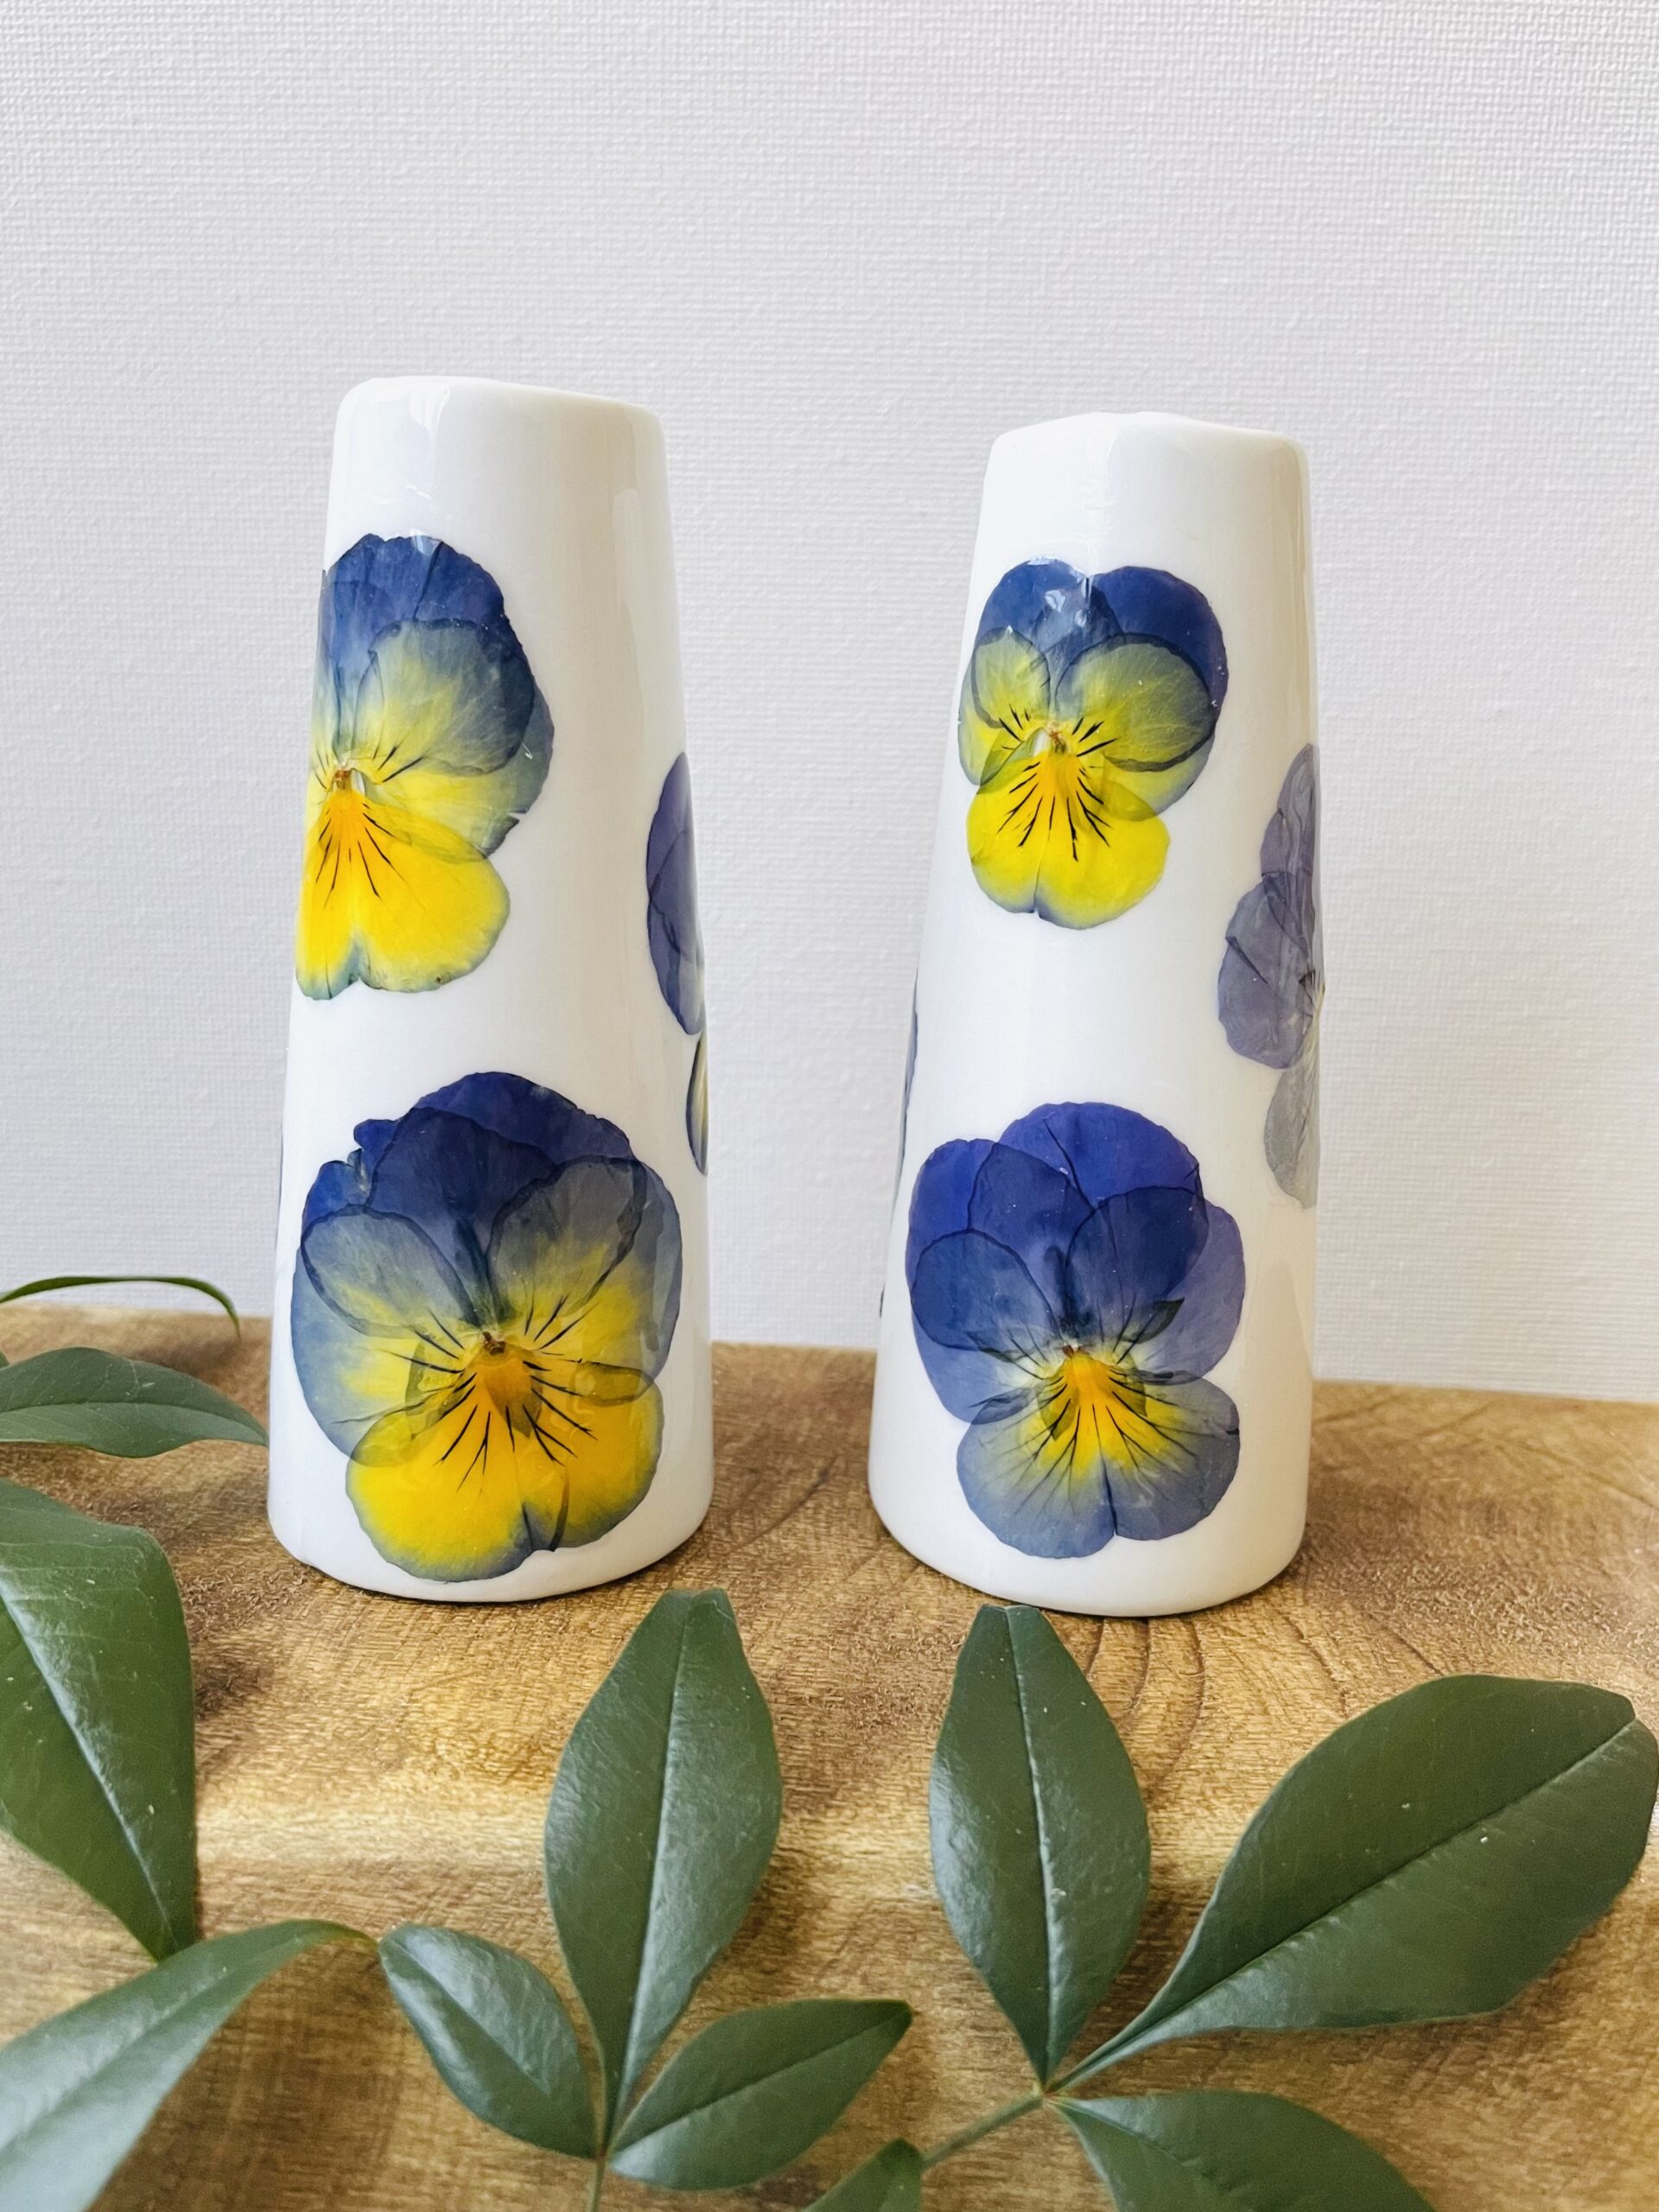 Two pressed flower bud vases with pansies sit on a wooden shelf with greenery.